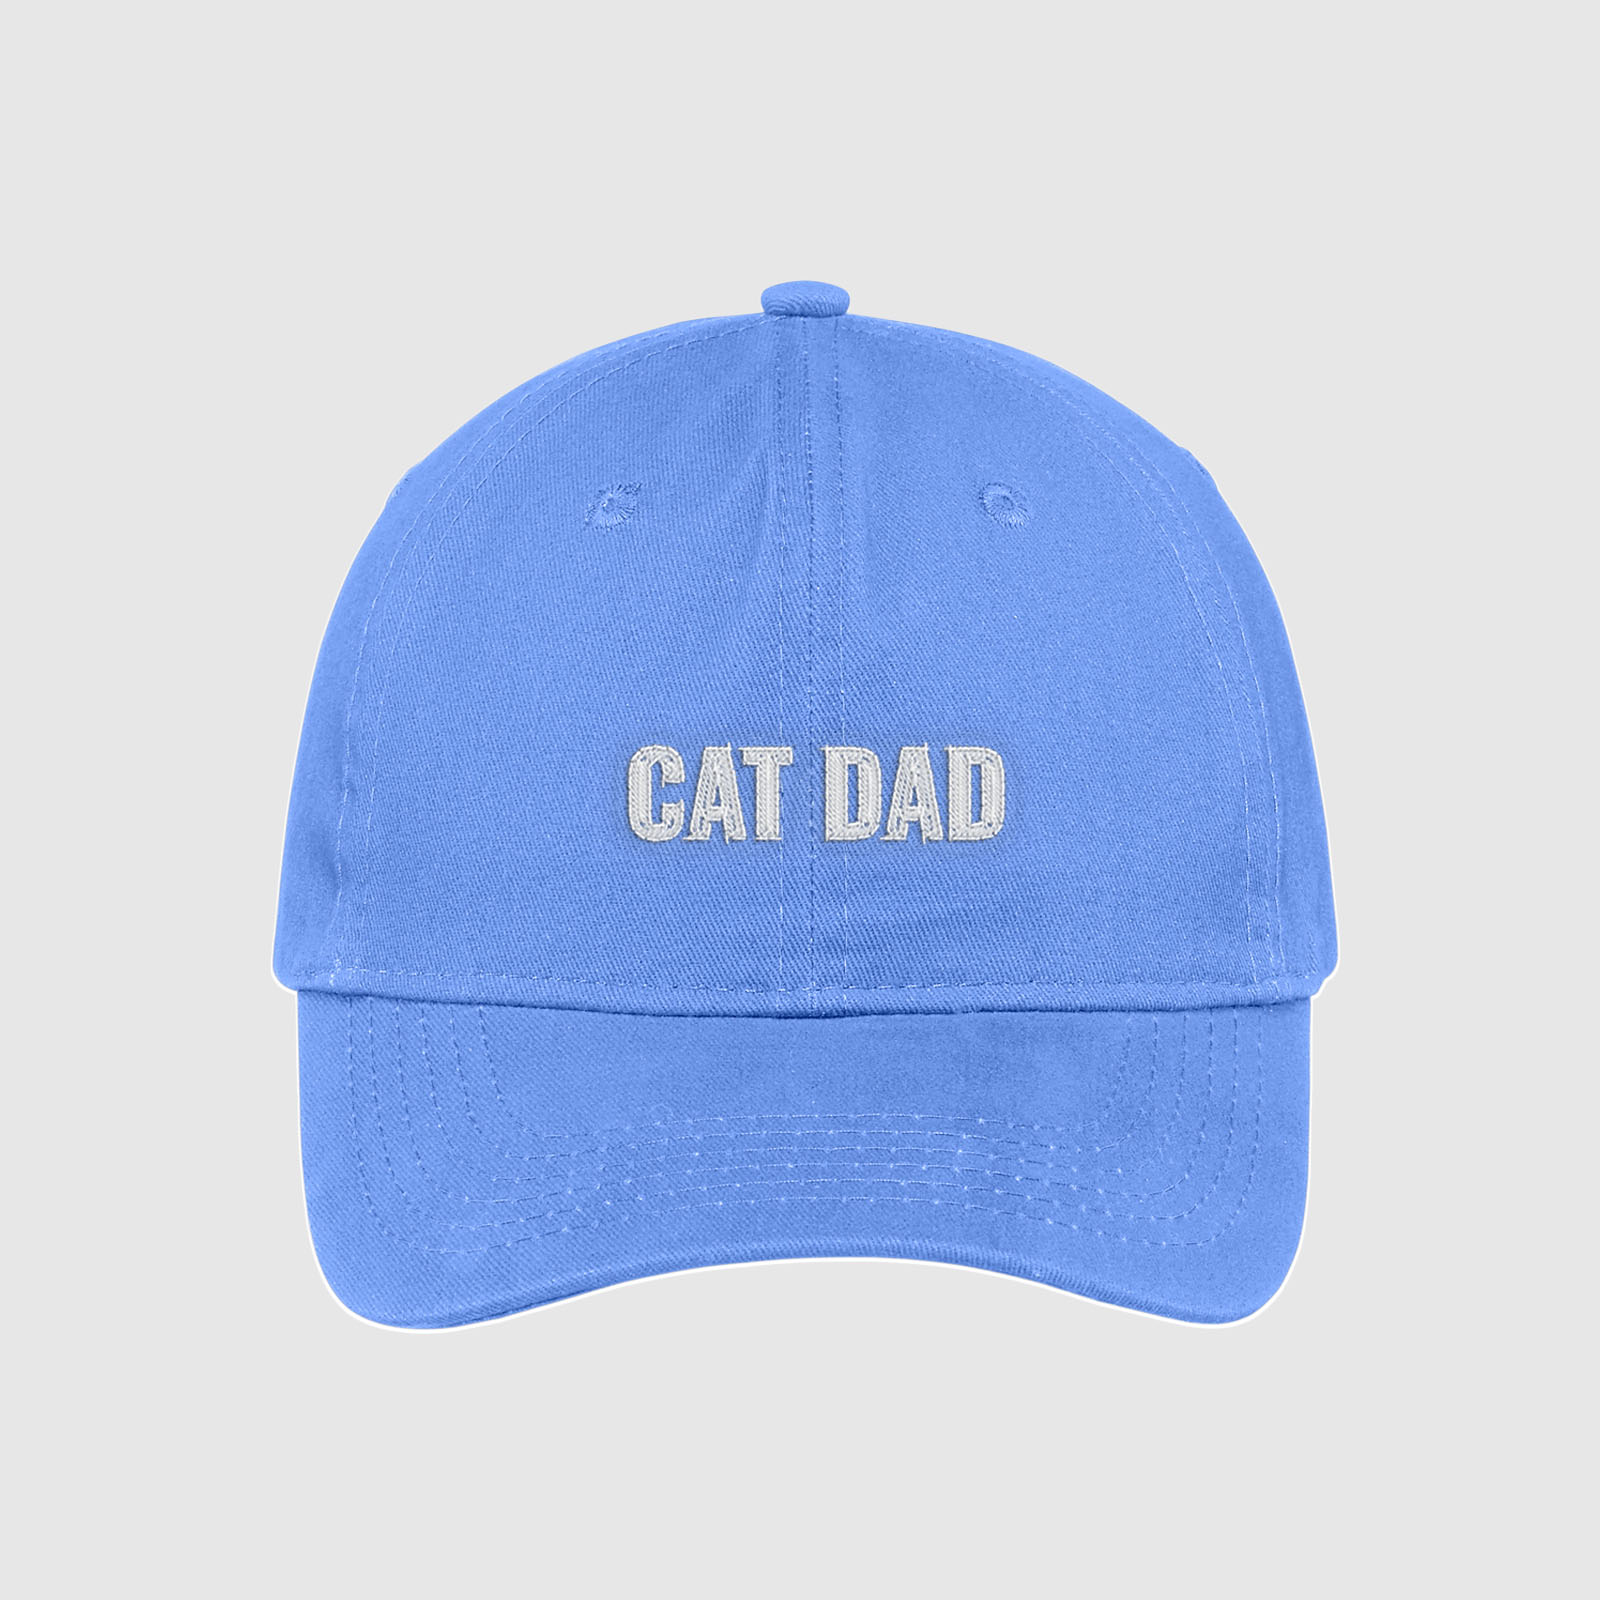 Carolina blue cat dad hat embroidered with white text